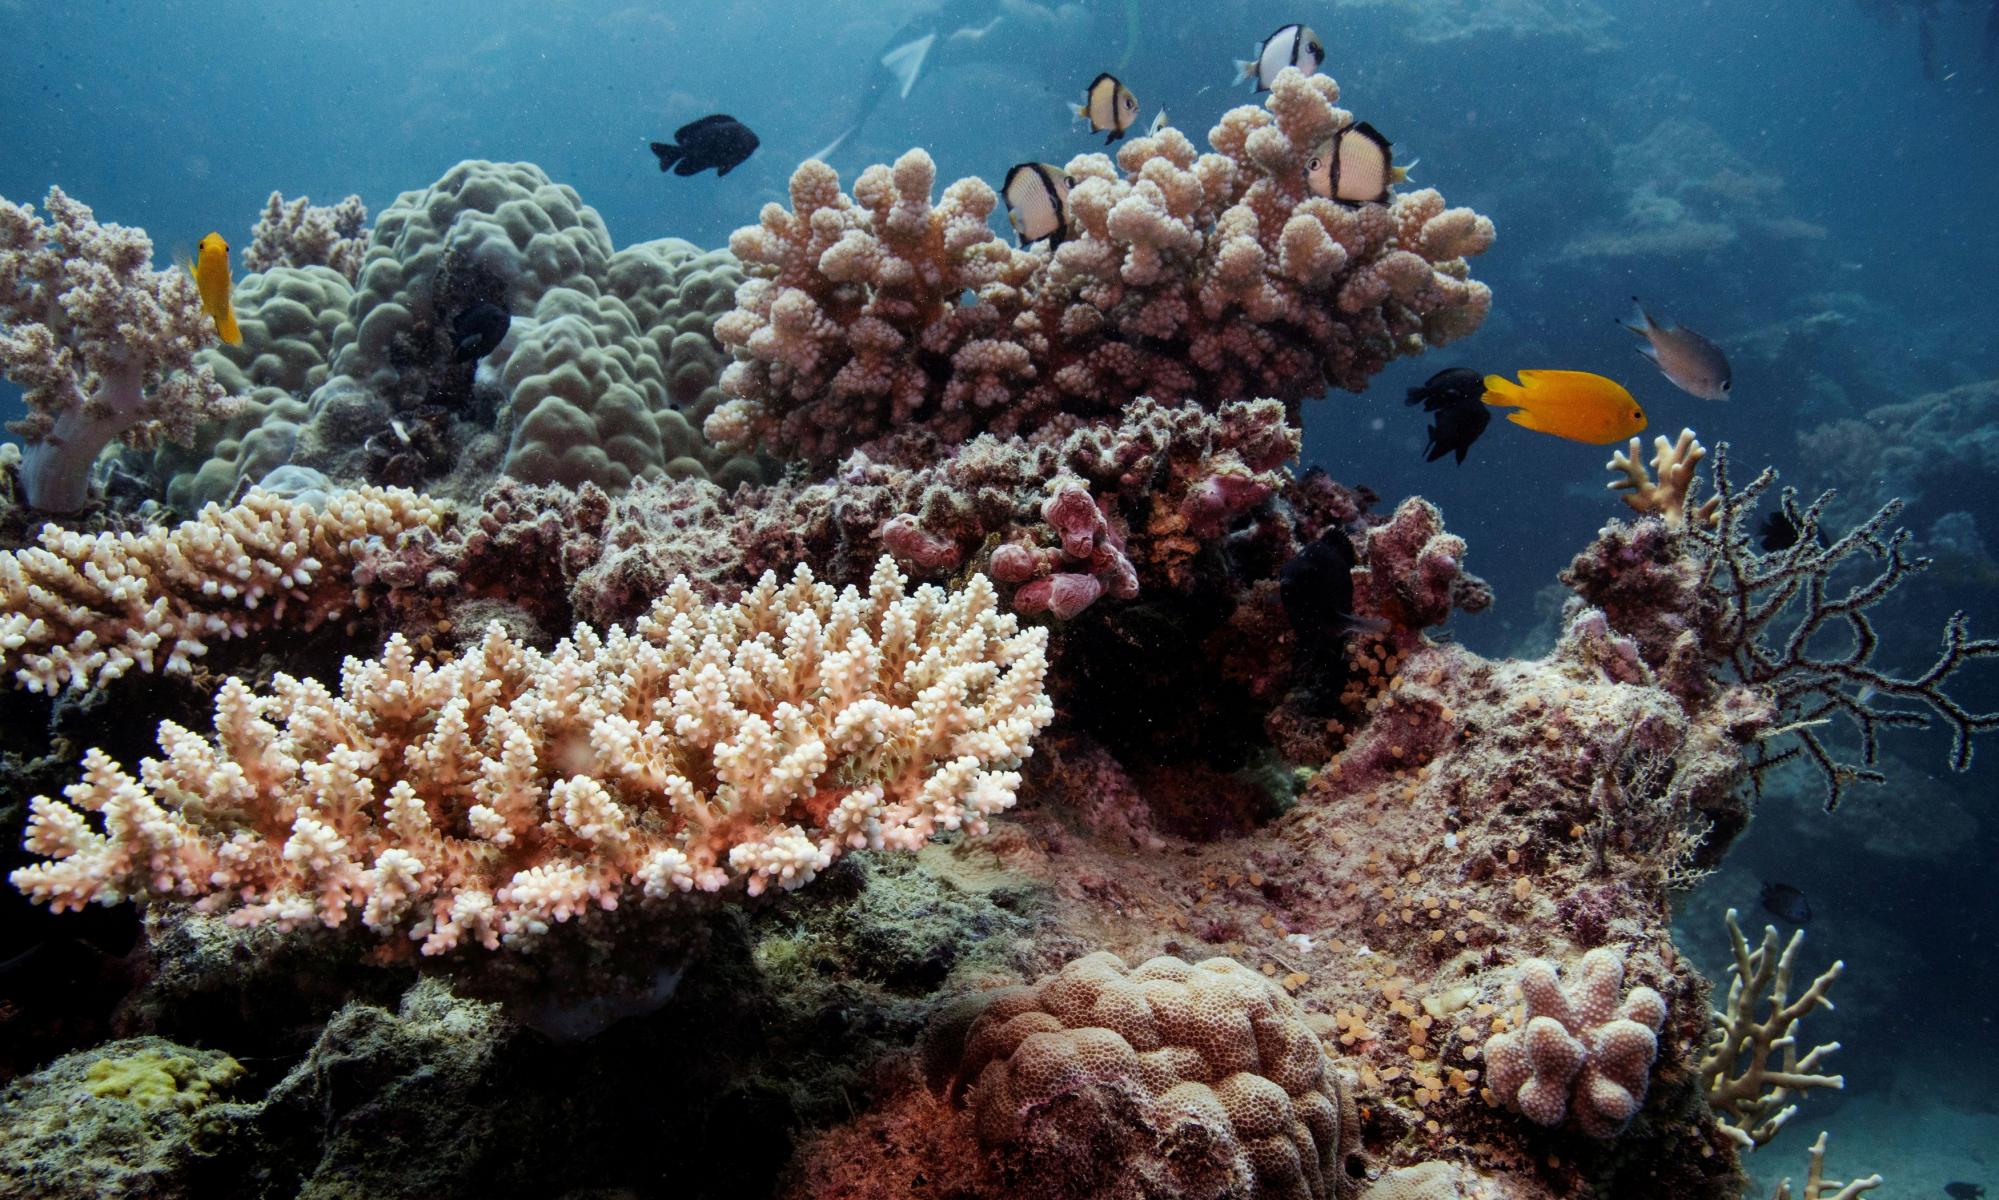 Unsustainable fishing worsens threats to Great Barrier Reef